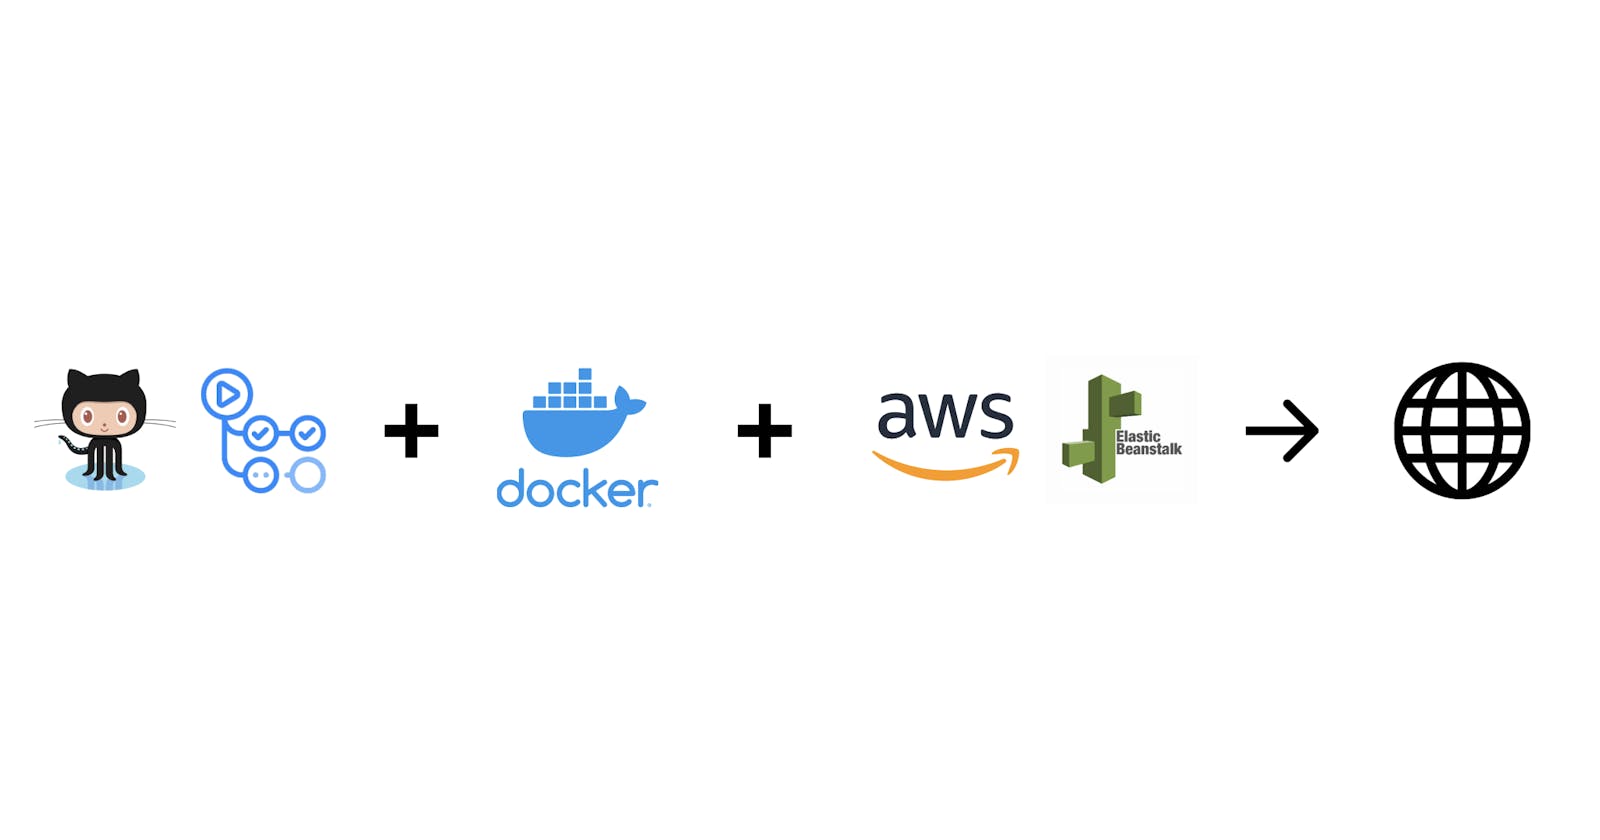 Complete guide on deploying a Docker application (React) to AWS Elastic Beanstalk using Docker Hub and Github Actions